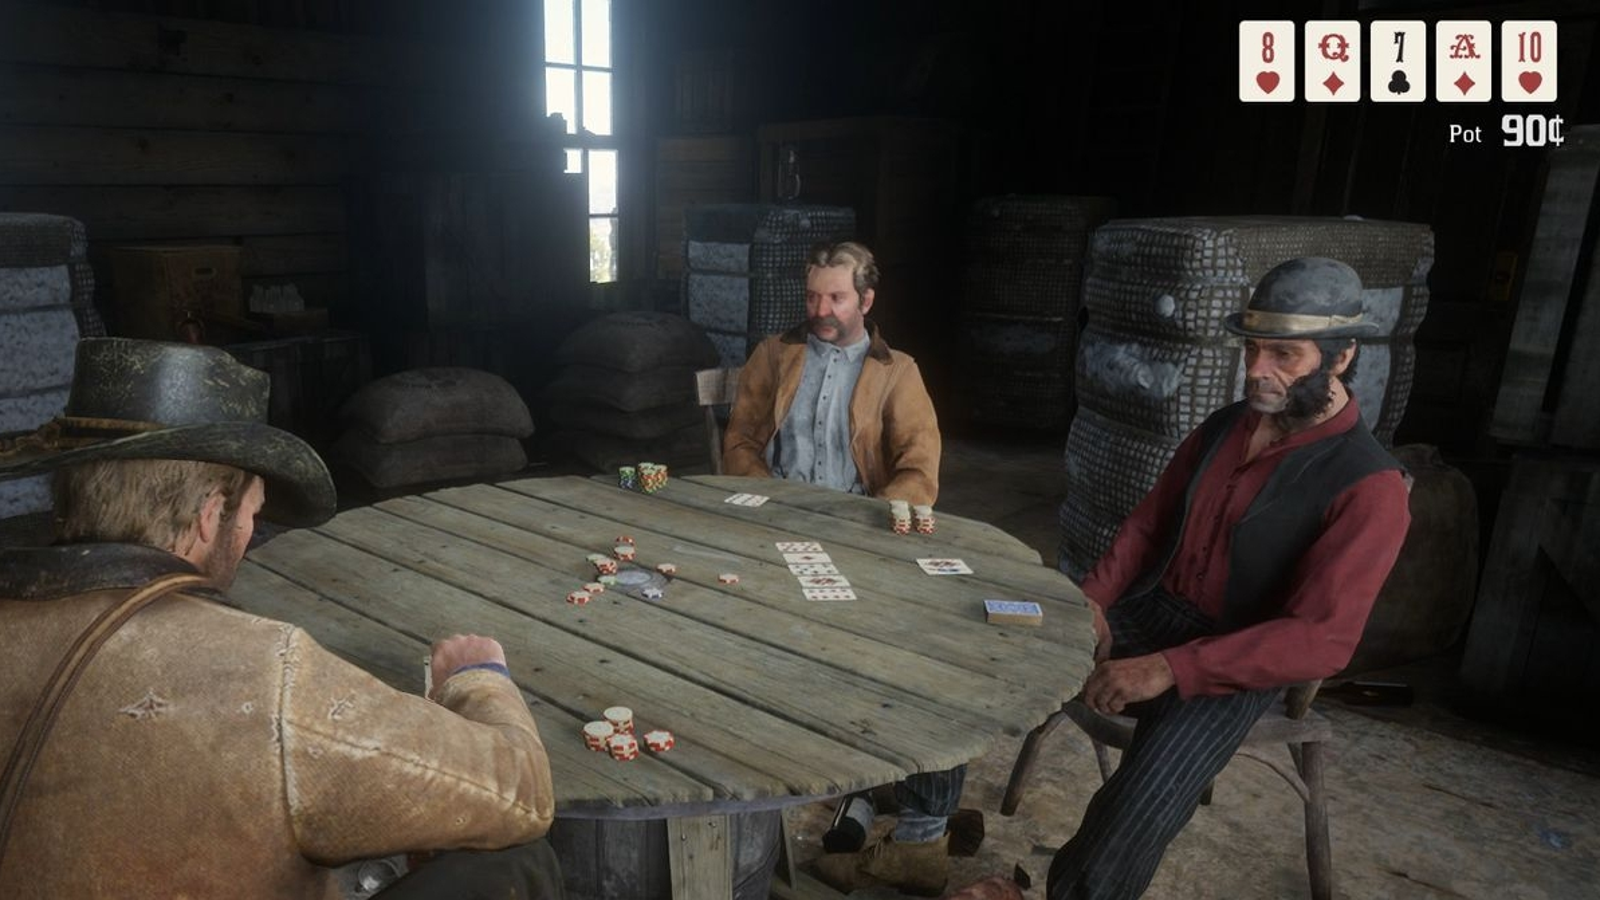 Rdr2 Chapter 2 Tips Red Dead Redemption 2 money making explained - how to get money fast with  Gold Bars and more | Eurogamer.net